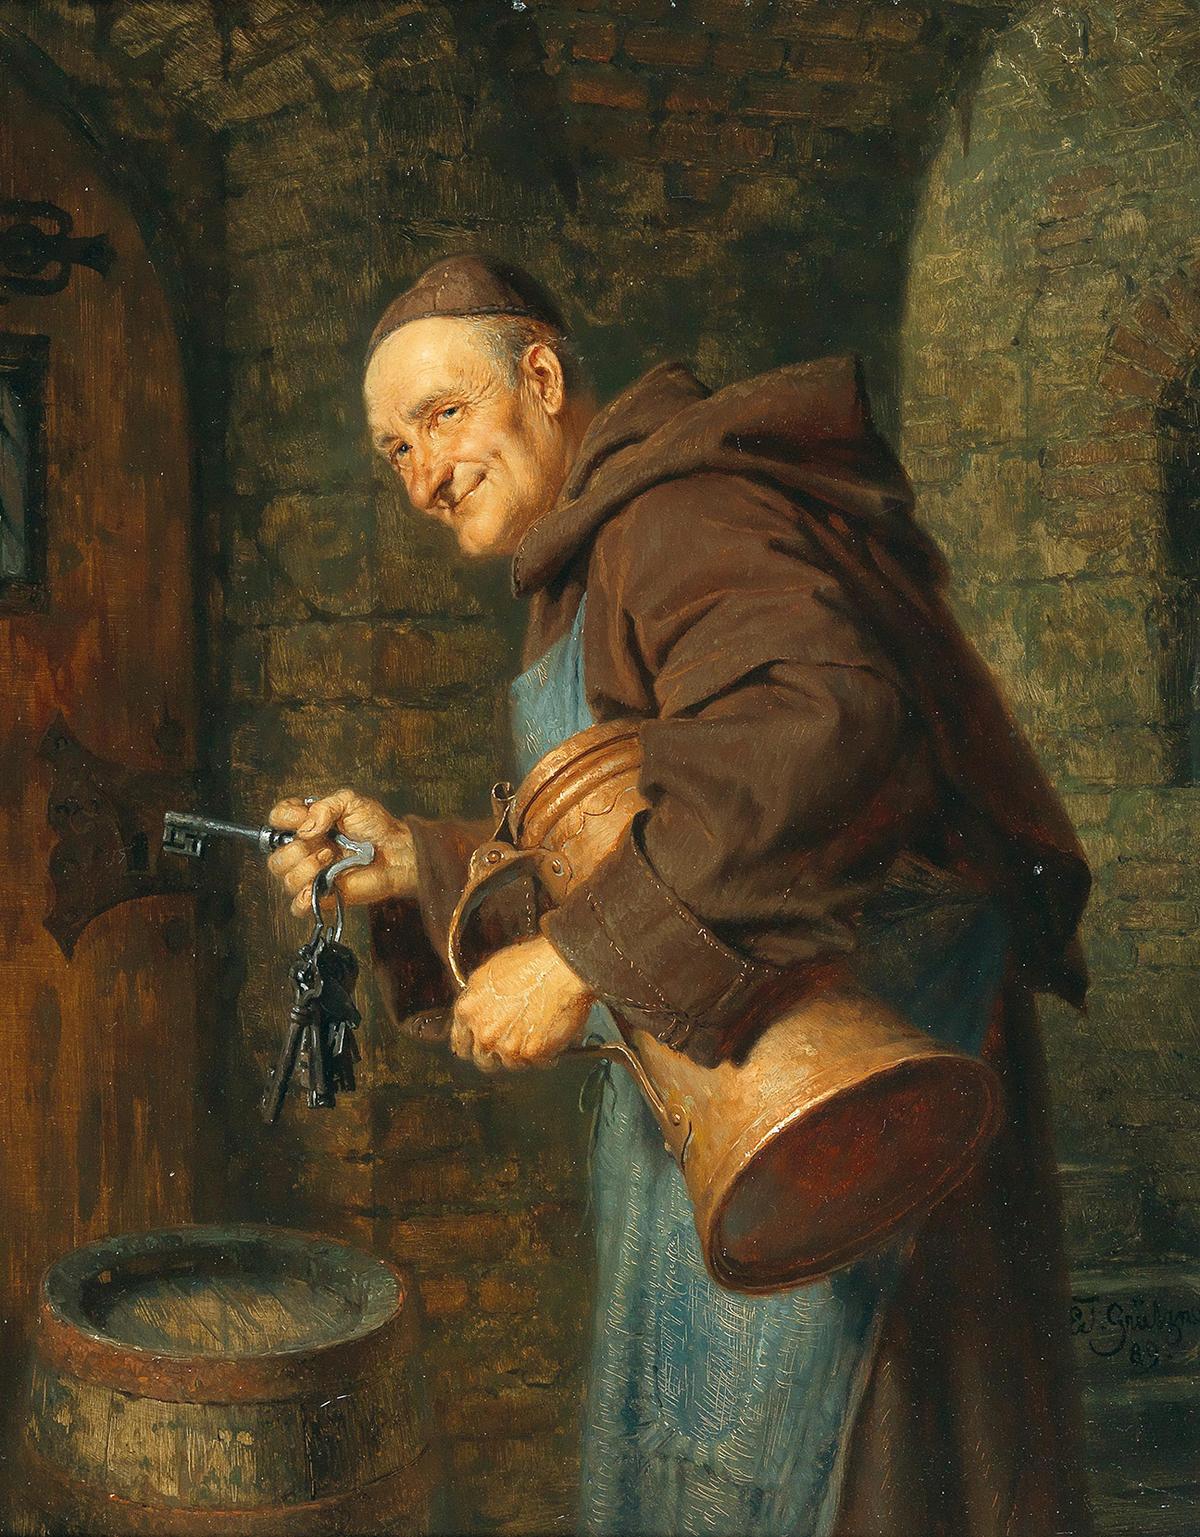 "A Cellarer With a Bunch of Keys," 1889, by Eduard von Grützner. Oil on panel. (PD-US)